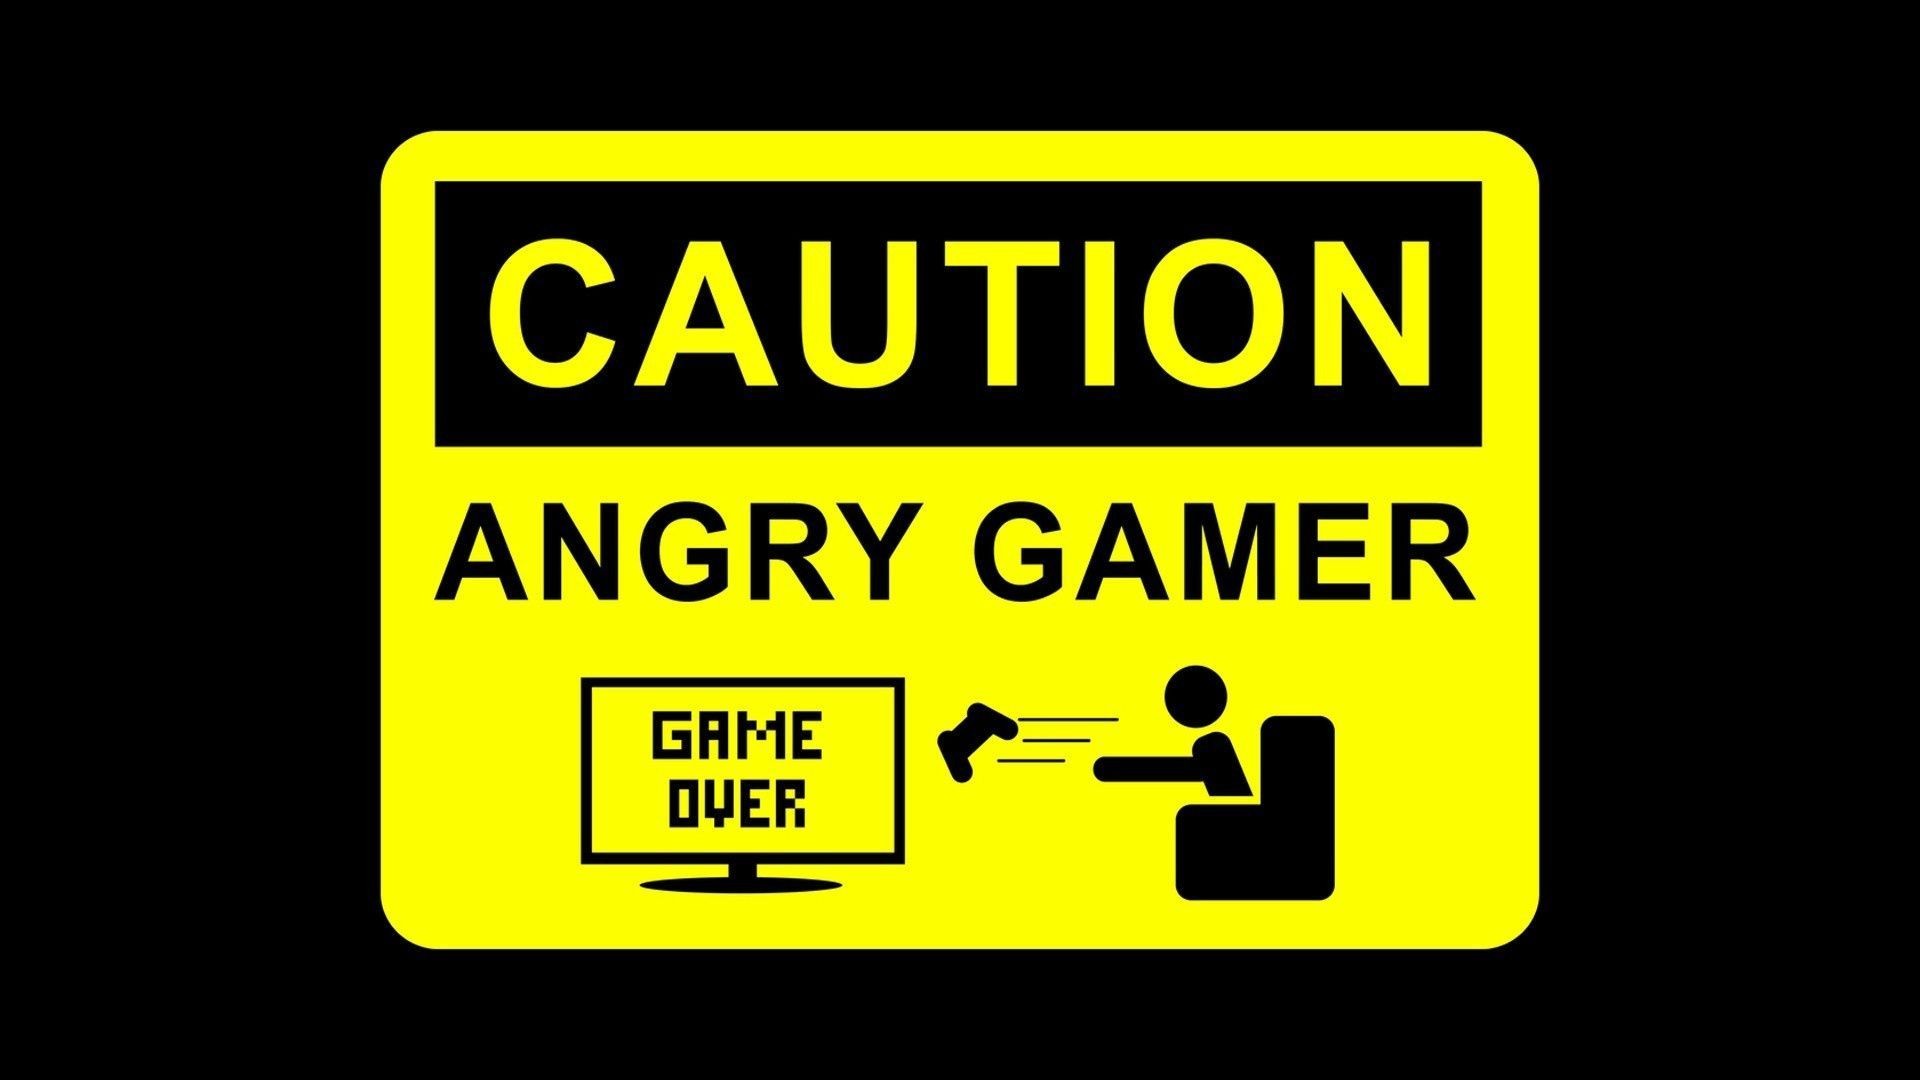 Gamer, Gamecrew, GAME OVER Wallpapers HD / Desktop and Mobile Backgrounds